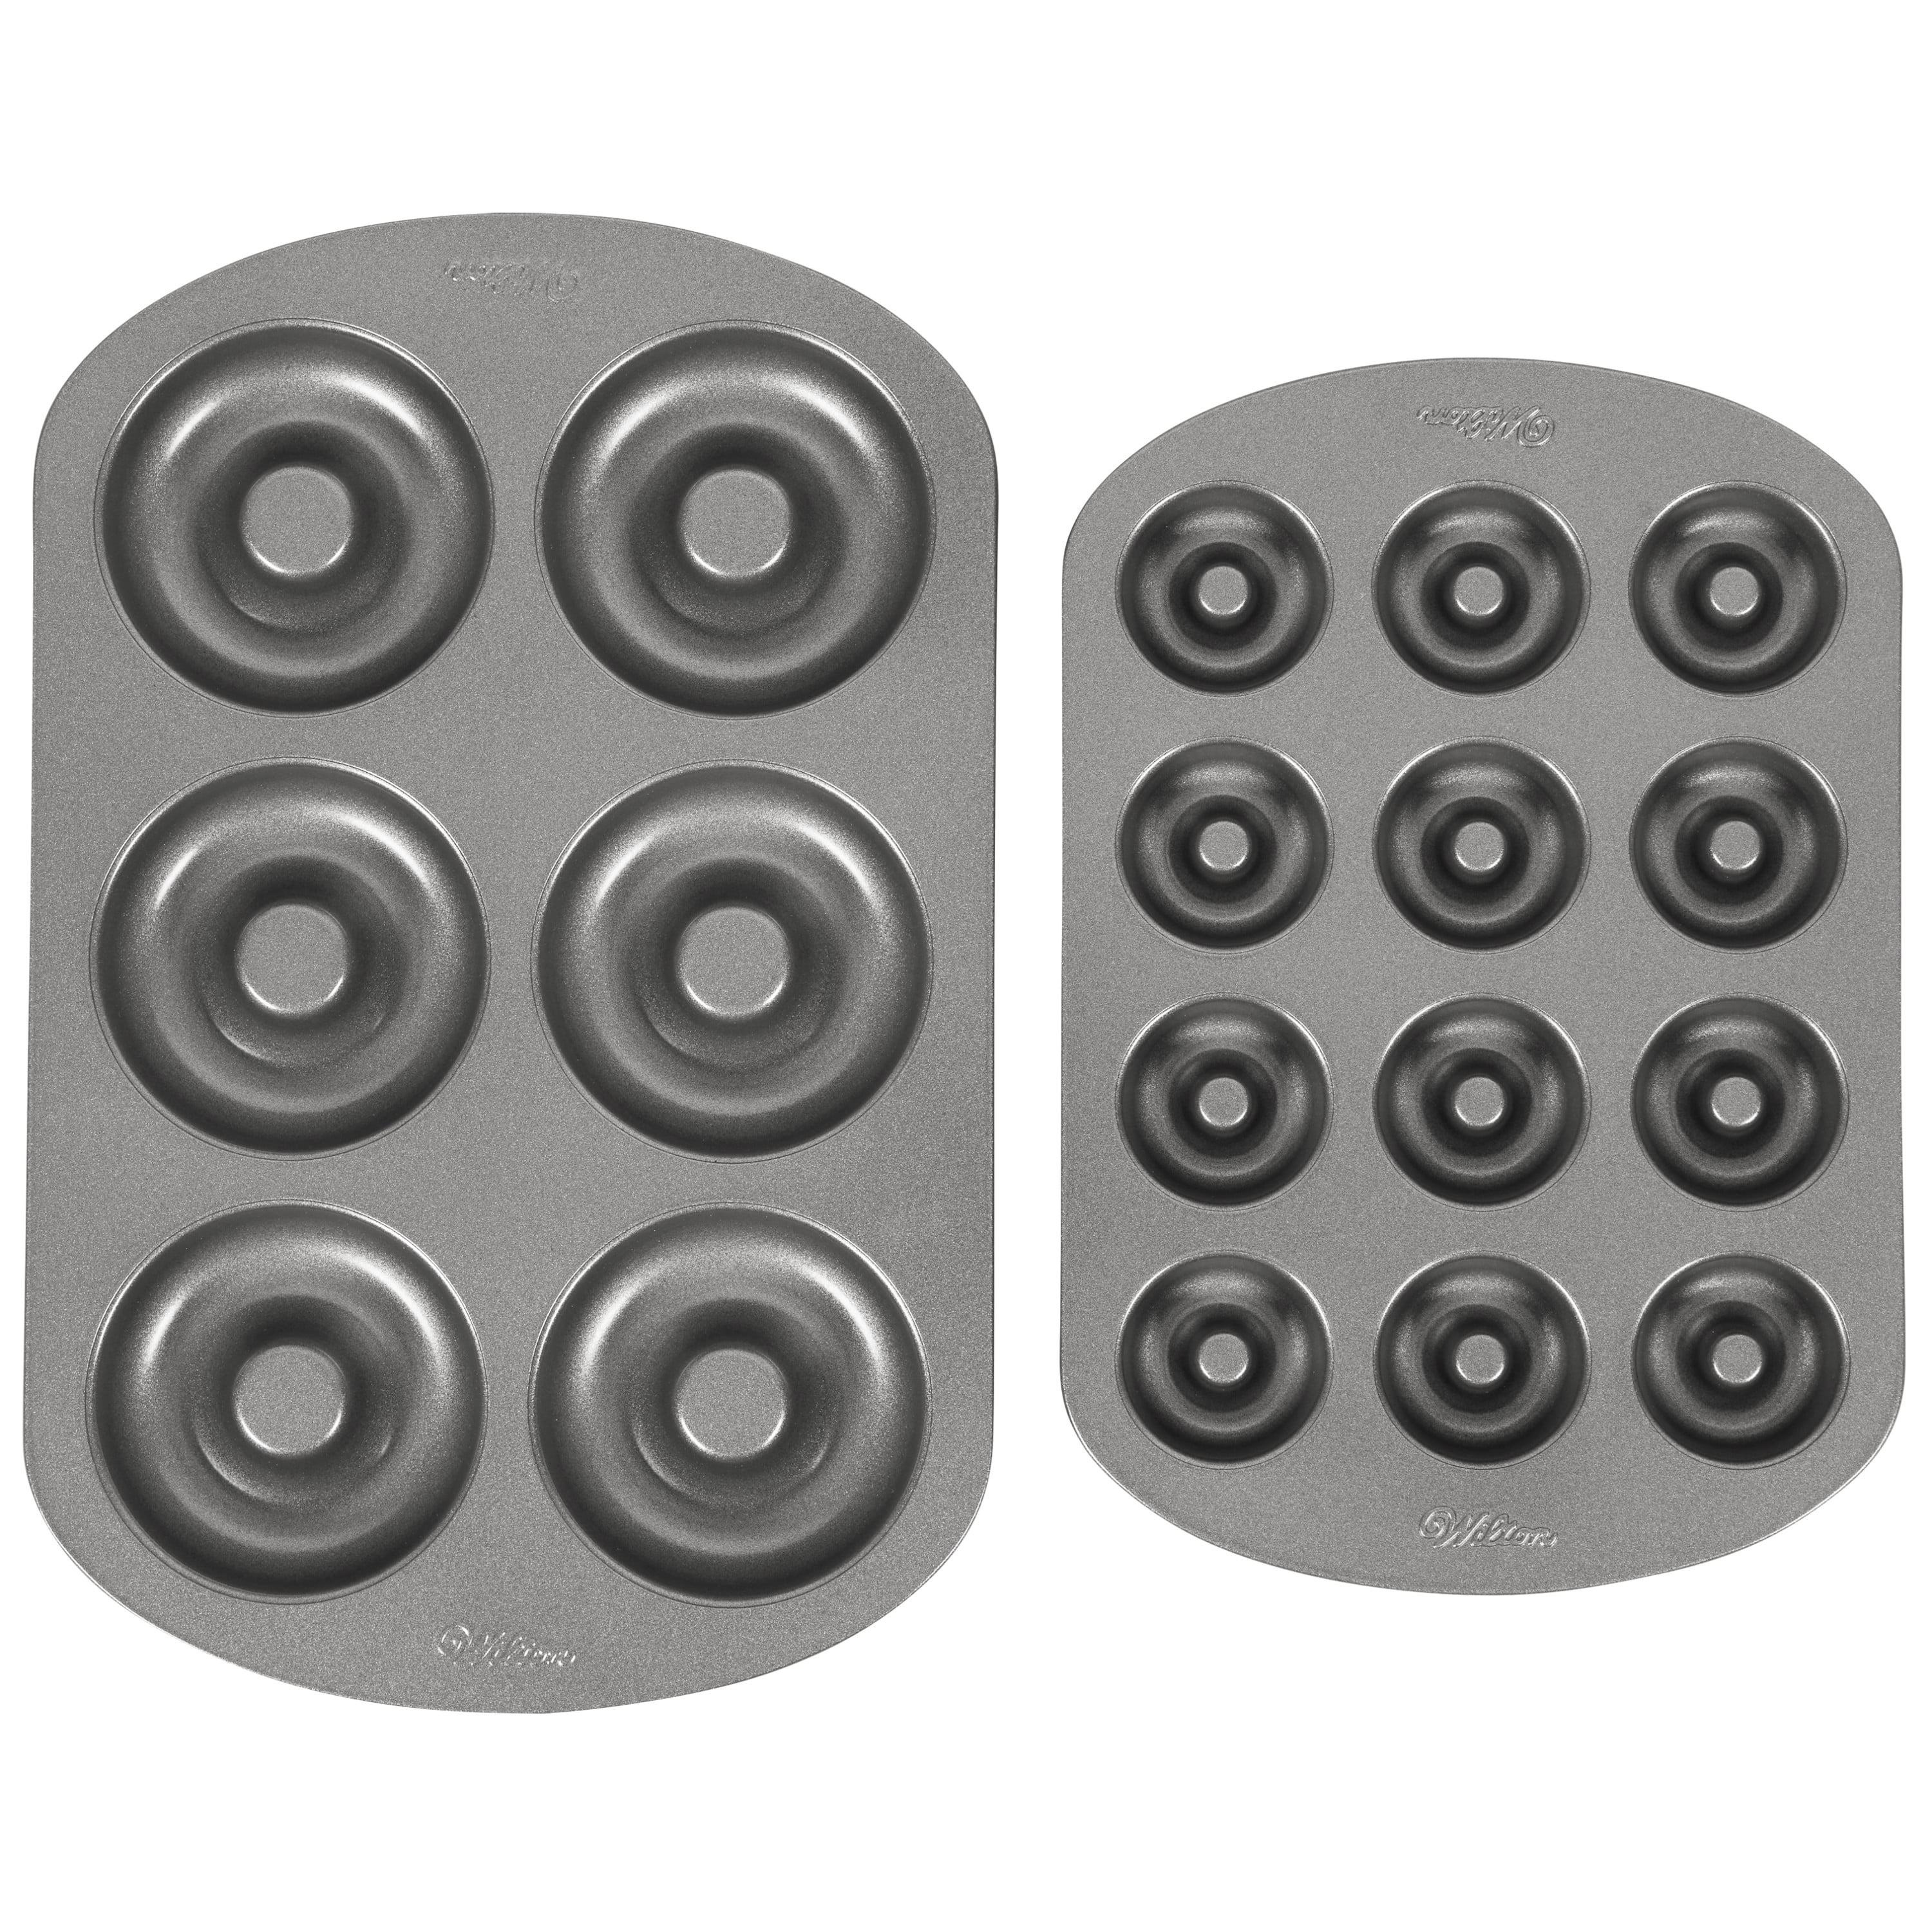 Wilton Non-stick 6-Cavity Donut Baking Pans Multipack of 2 